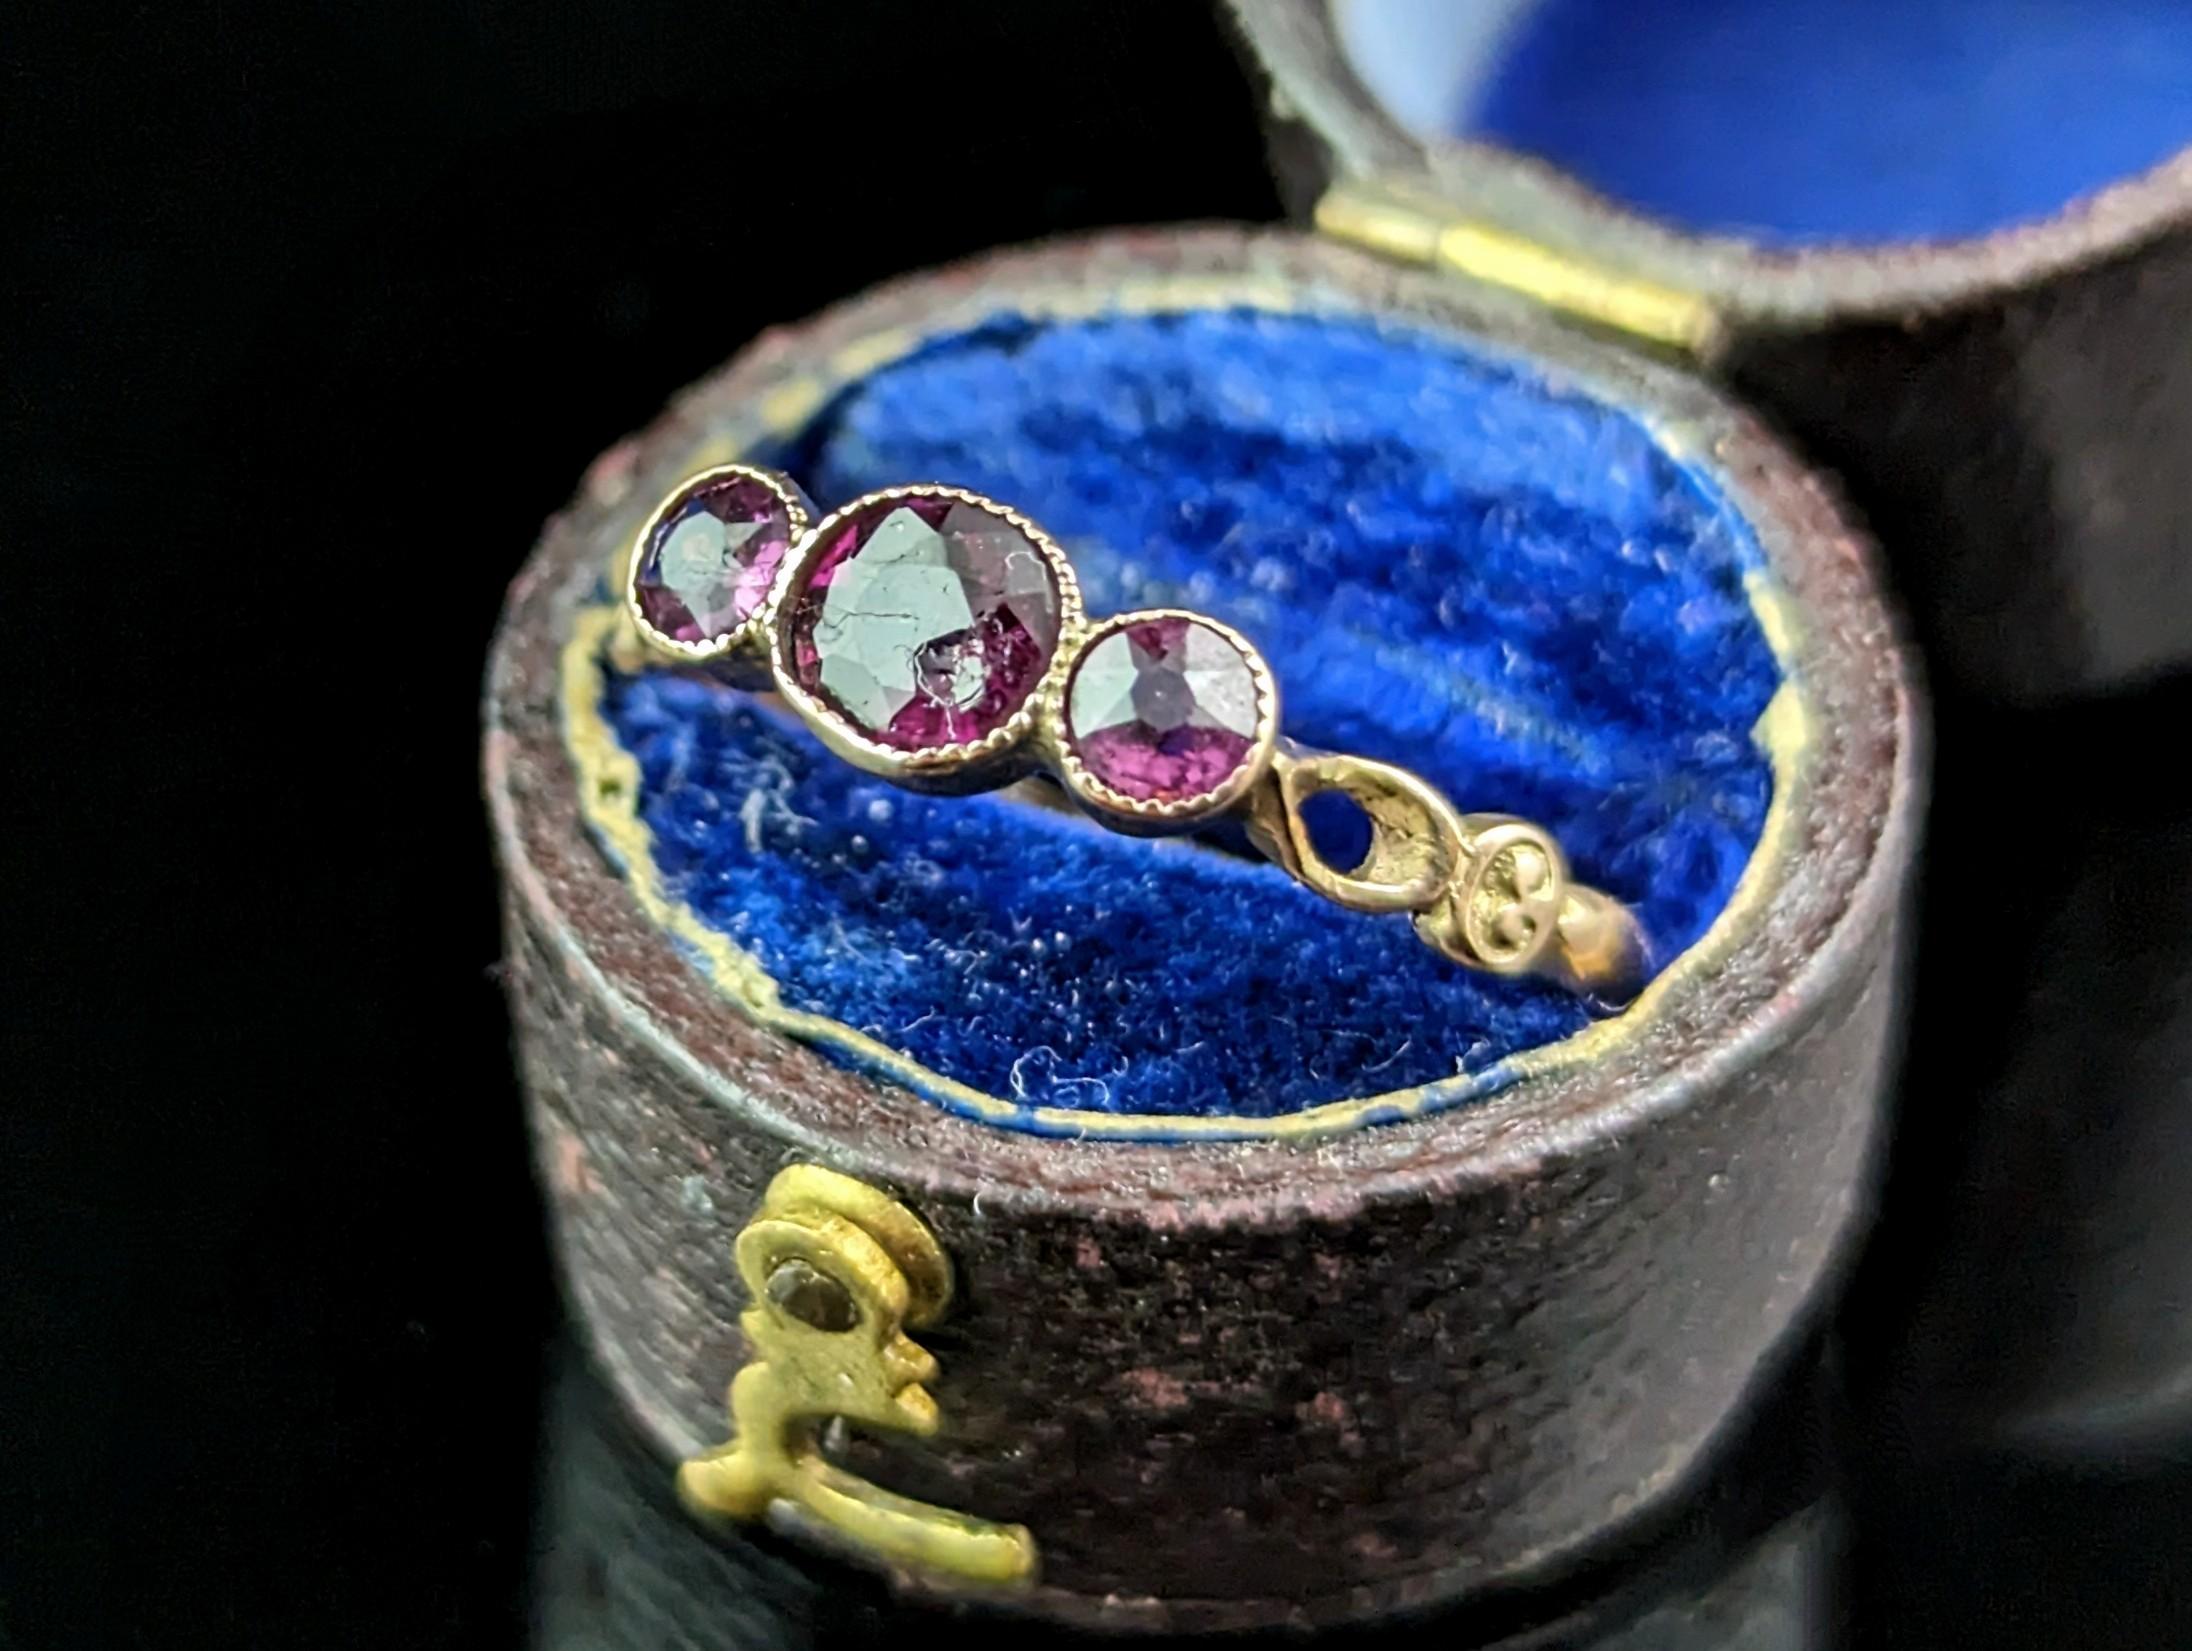 A pretty and dainty little antique Rhodolite Garnet three stone ring.

This is a sweet and delicate piece with a slender 9ct rose gold band and decorative scrollwork and cut out shoulders.

The face is bezel set with three Rhodolite Garnets the